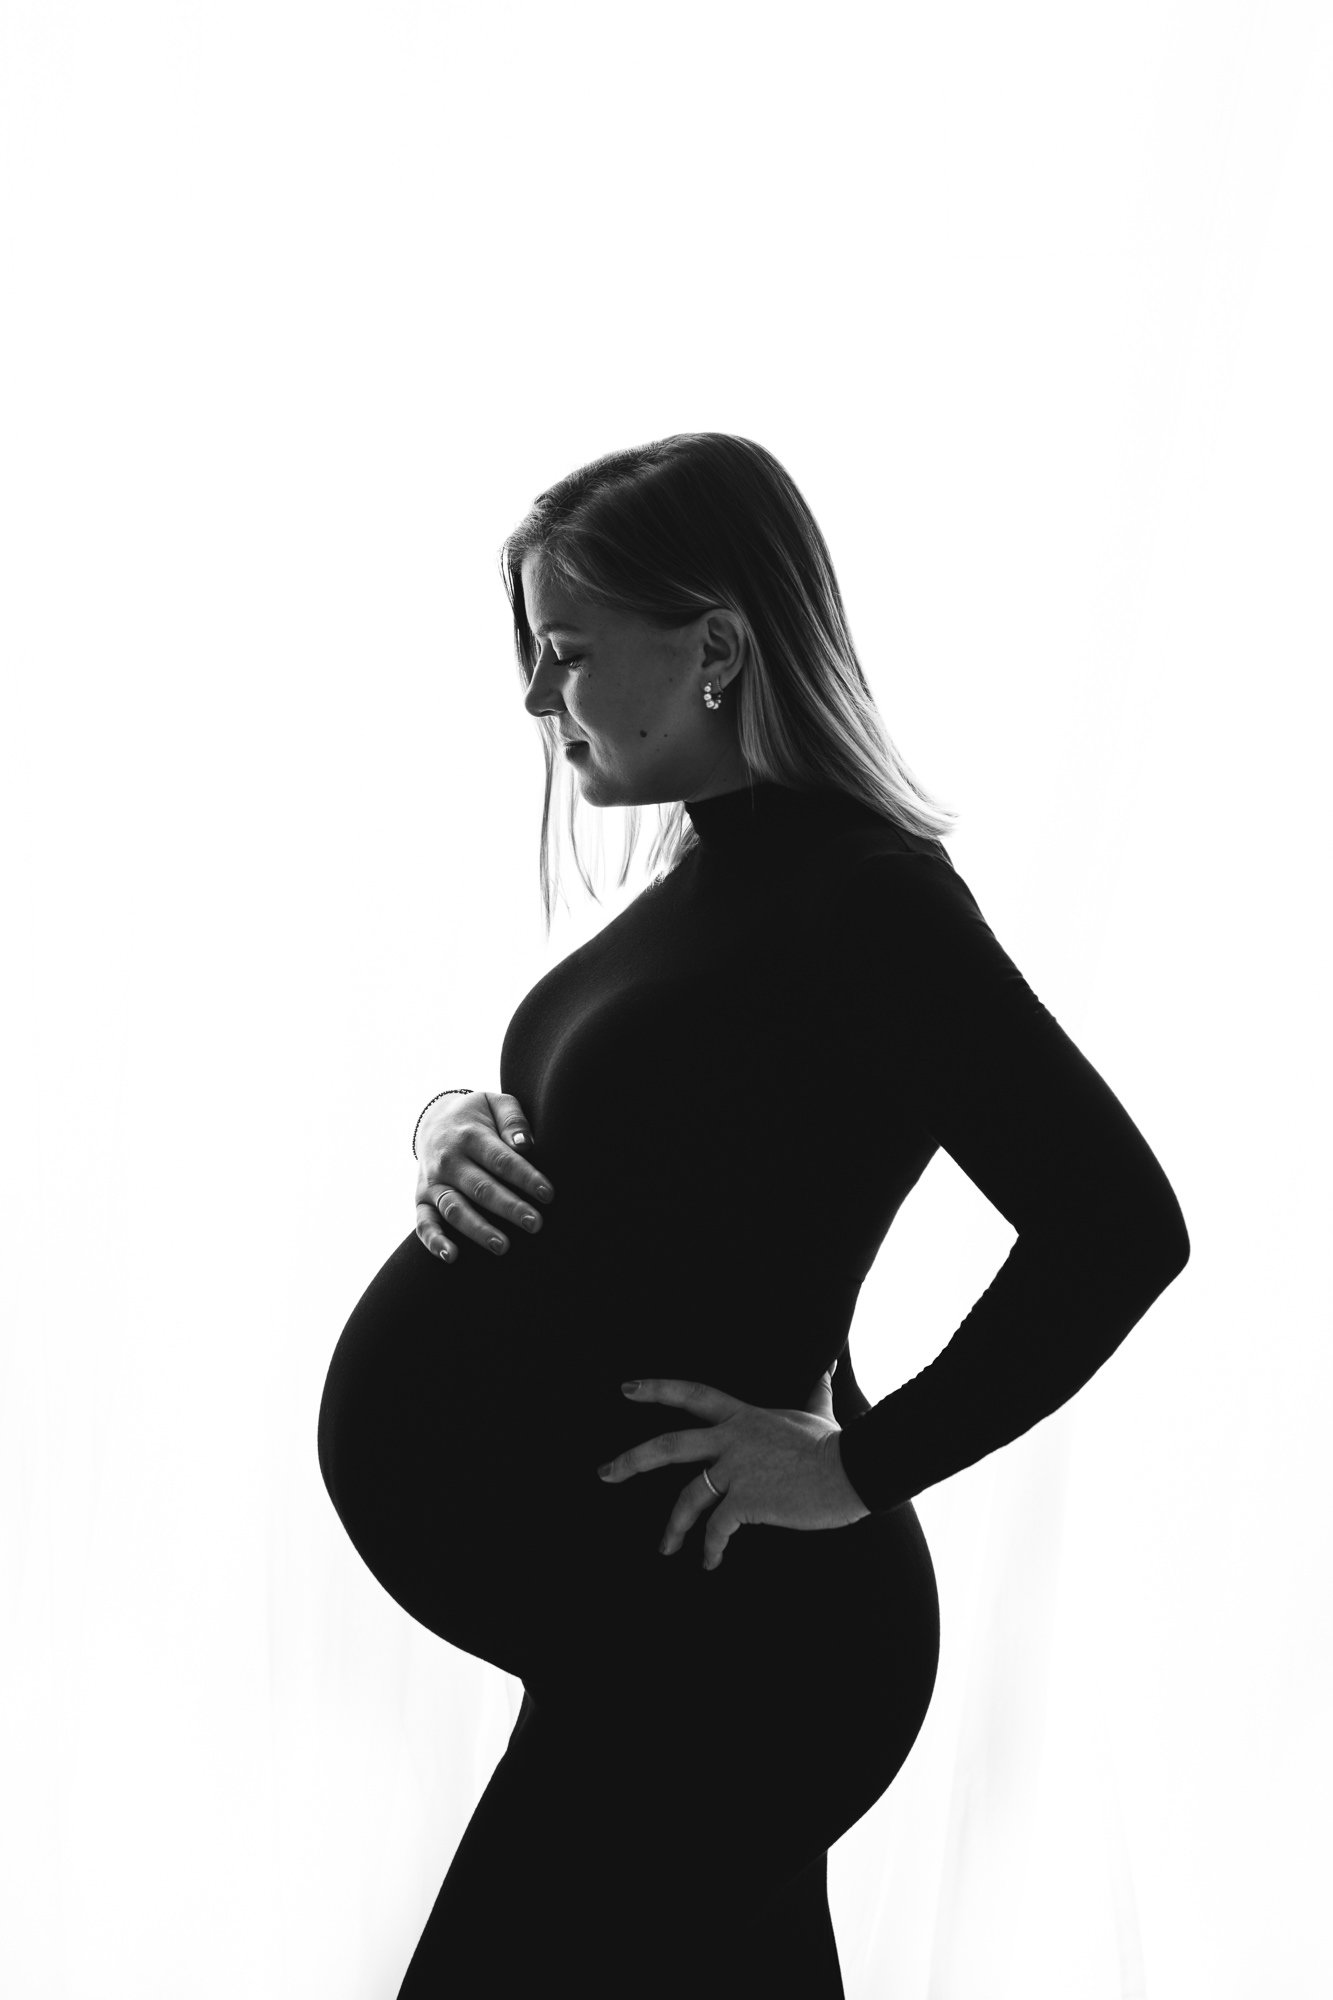  Maternity silhouette portrait with a mother holding her baby bump at a white studio in NJ by Nicole Hawkins Photography. timeless maternity portrait studio silhouette portraits #NicoleHawkinsPhotography #NicoleHawkinsMaternity #MaternityStudioPortra